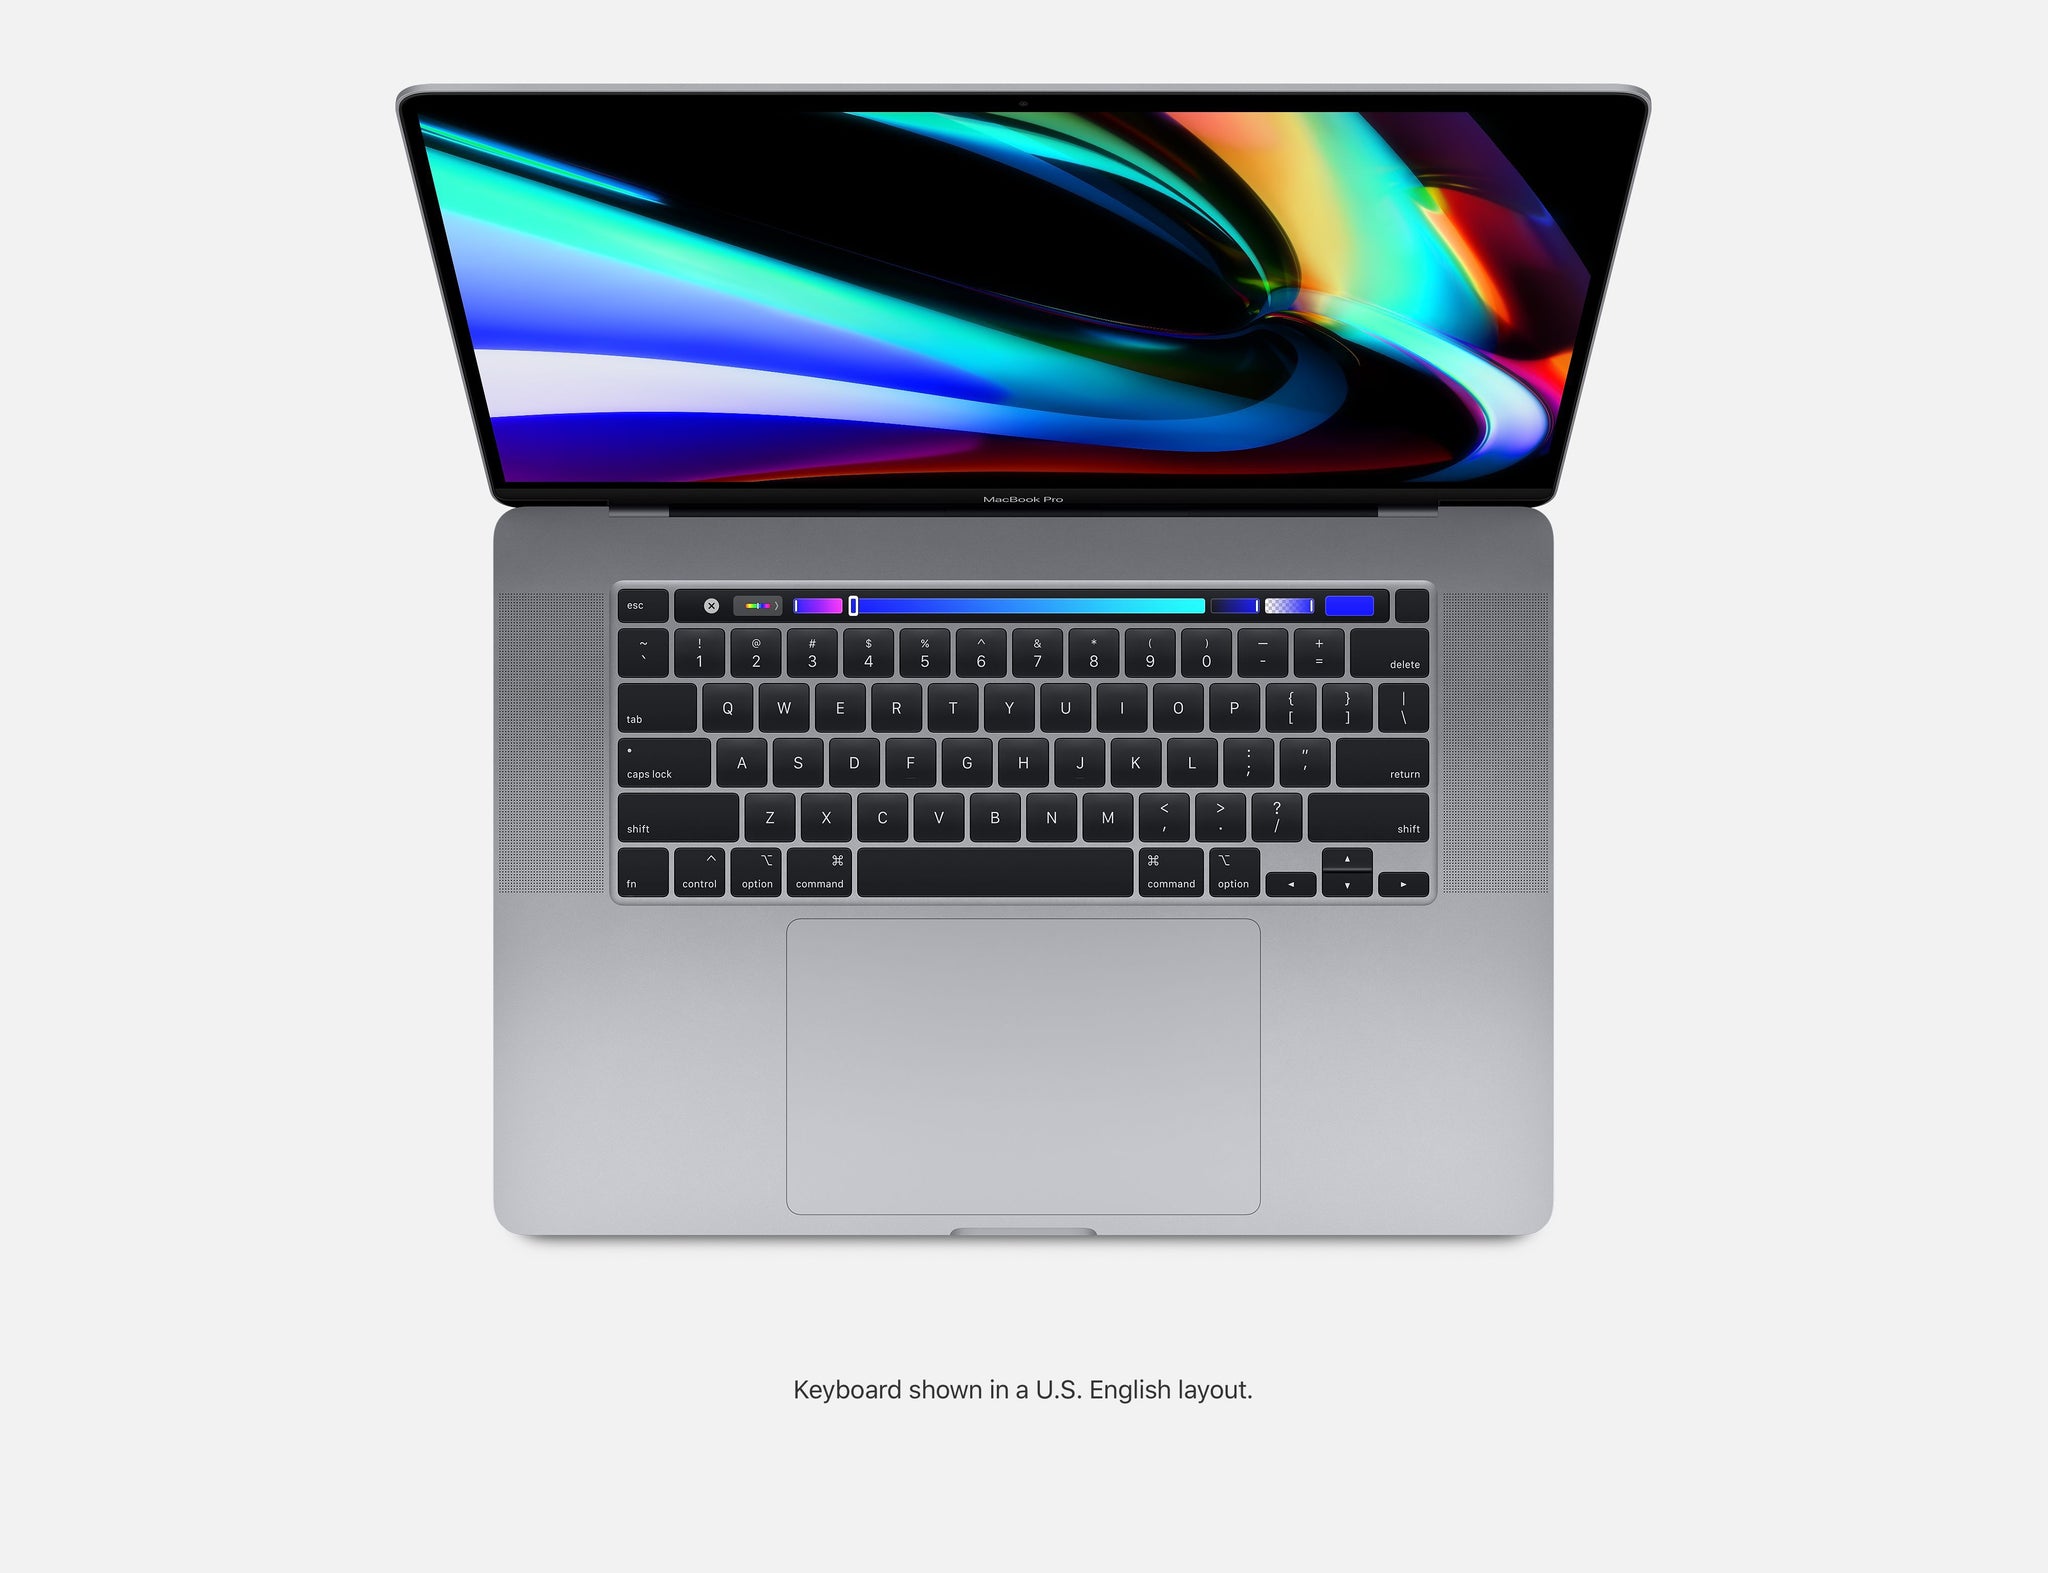 Apple MacBook Pro 16" with Touch Bar,9th-Gen 6-Core Intel Core i7 2.6GHz,32GB RAM,512GBSSD,Late 2019